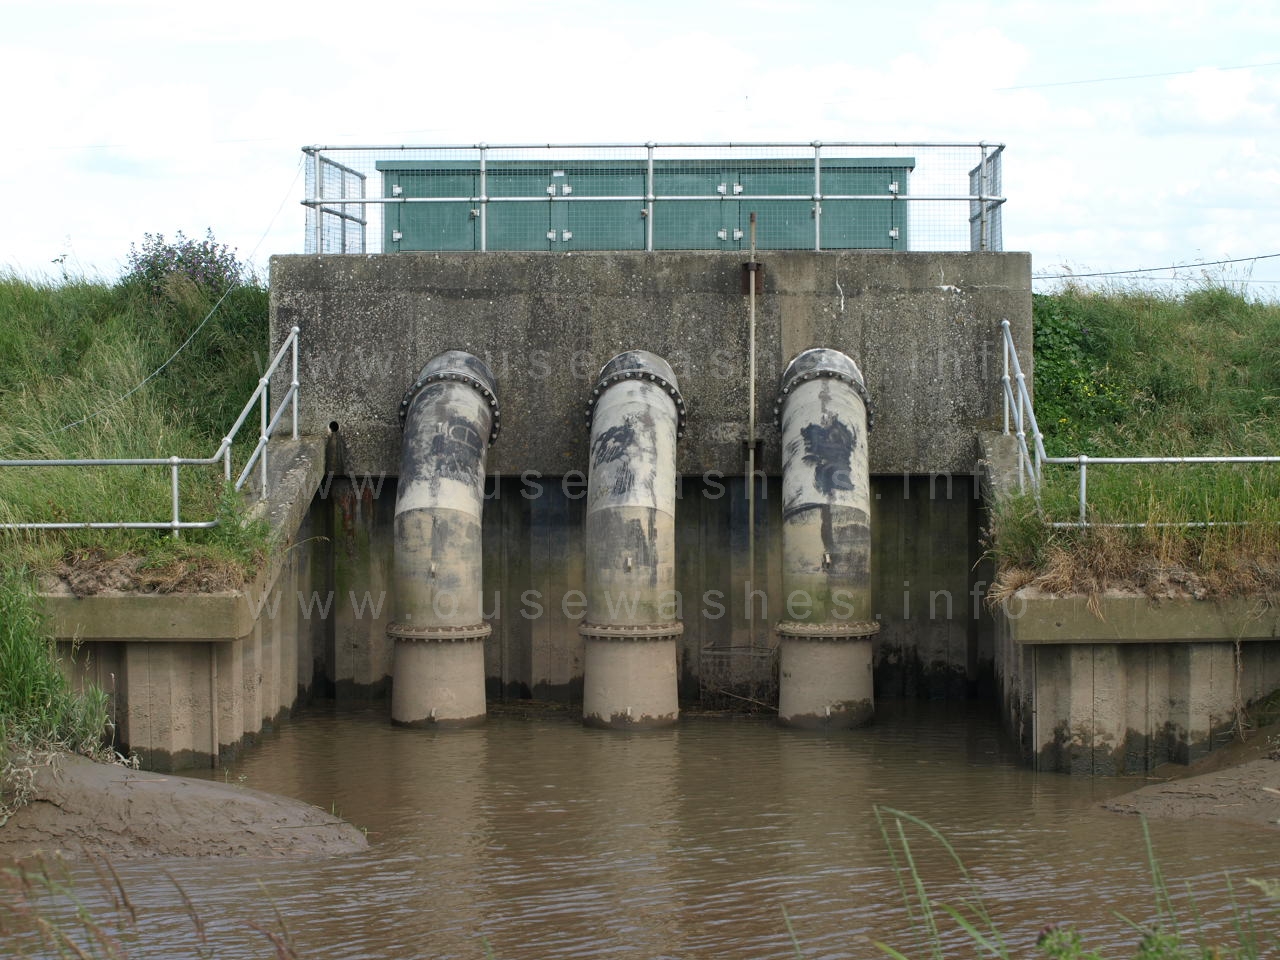 discharge pipes seen from far bank